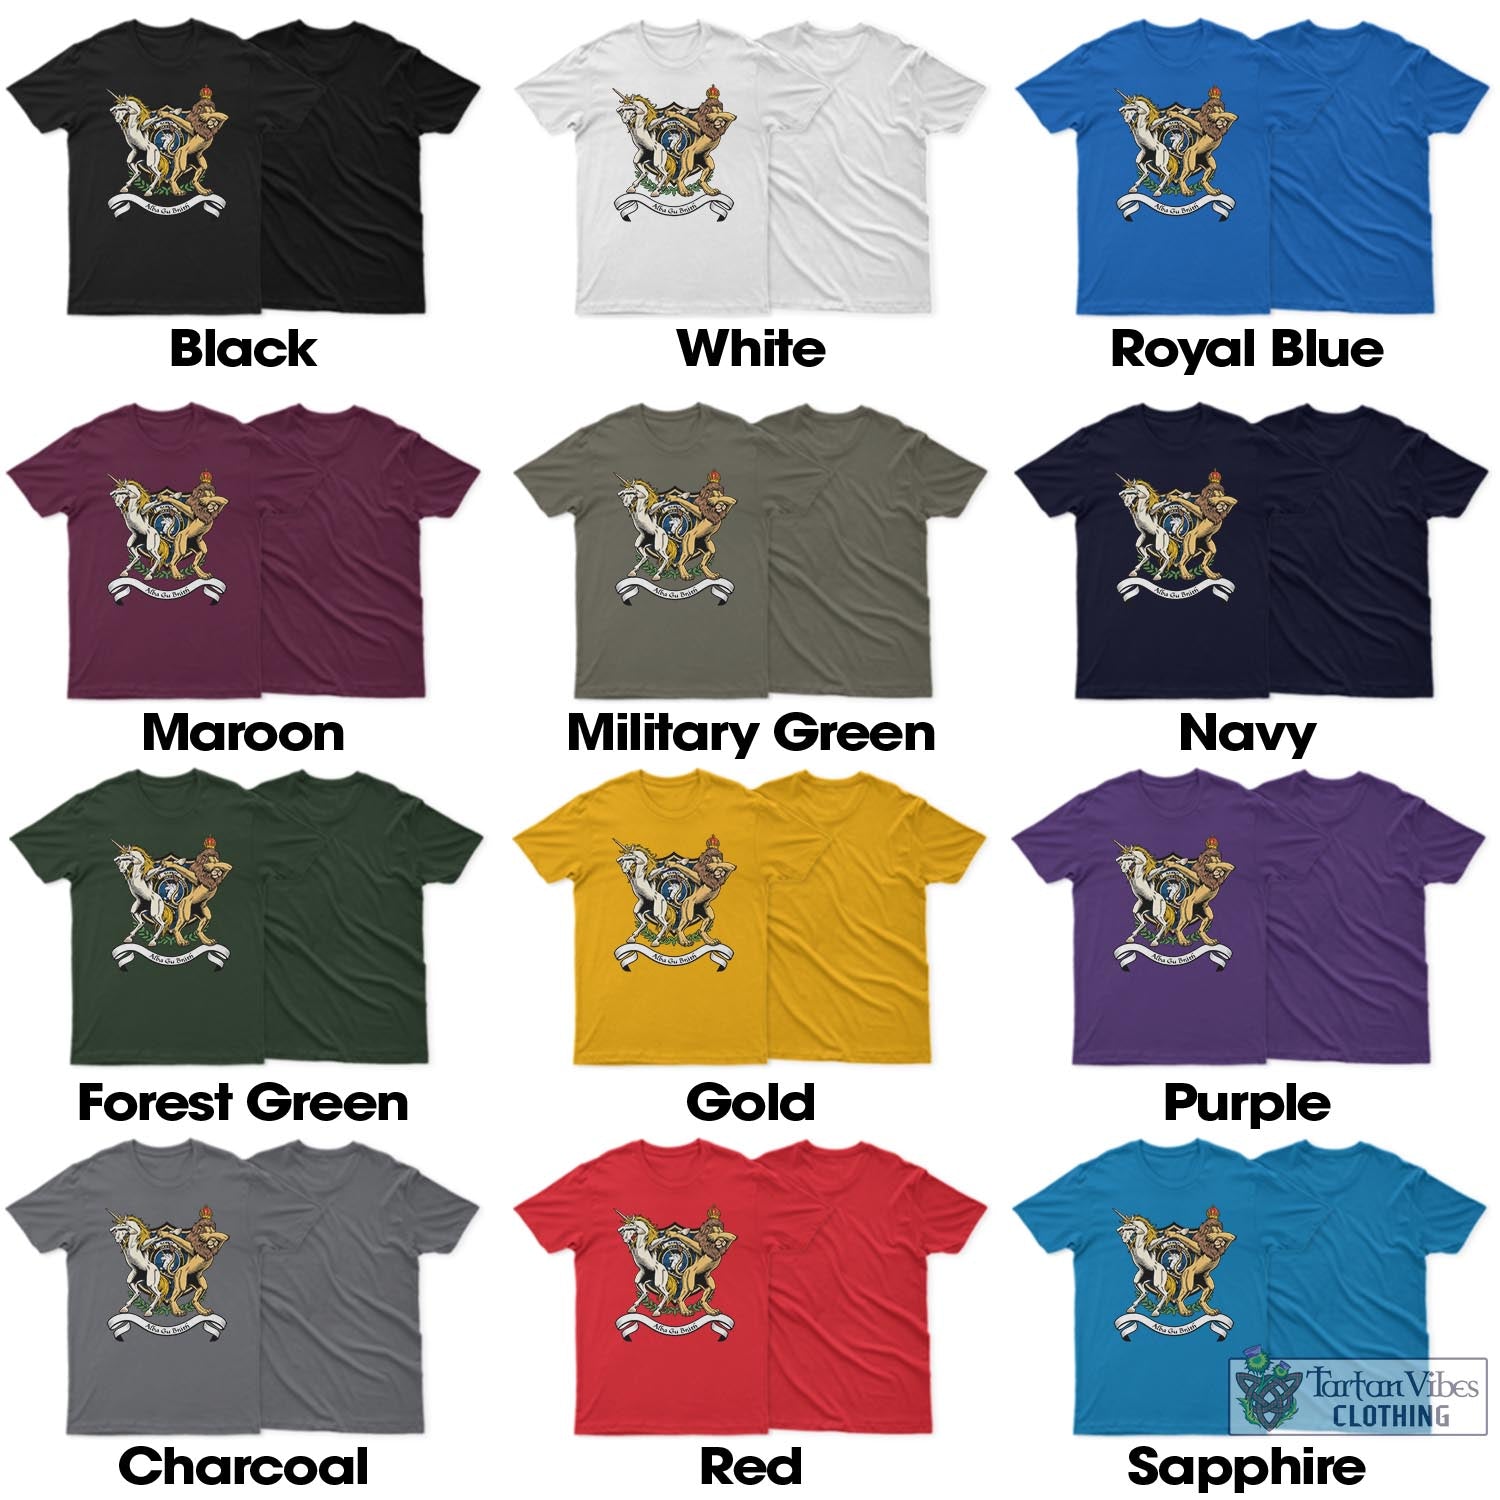 Tartan Vibes Clothing Ramsay Blue Hunting Family Crest Cotton Men's T-Shirt with Scotland Royal Coat Of Arm Funny Style